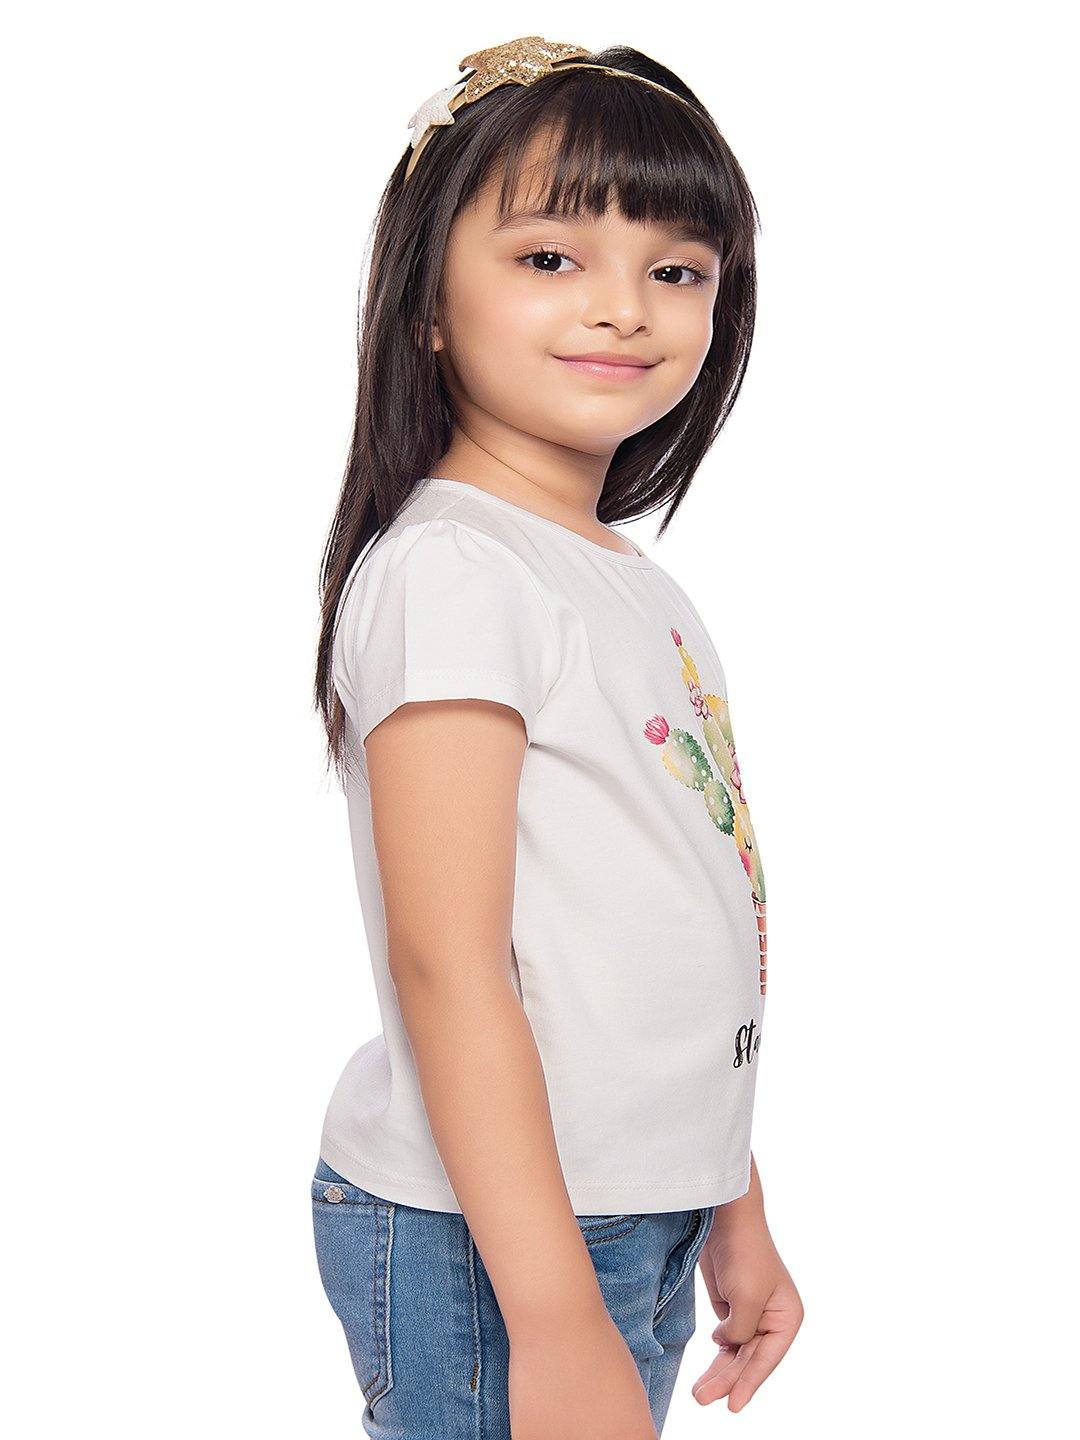 Tiny Baby White Colored Top - T-110 White - TINY BABY INDIA shop.tinybaby.in